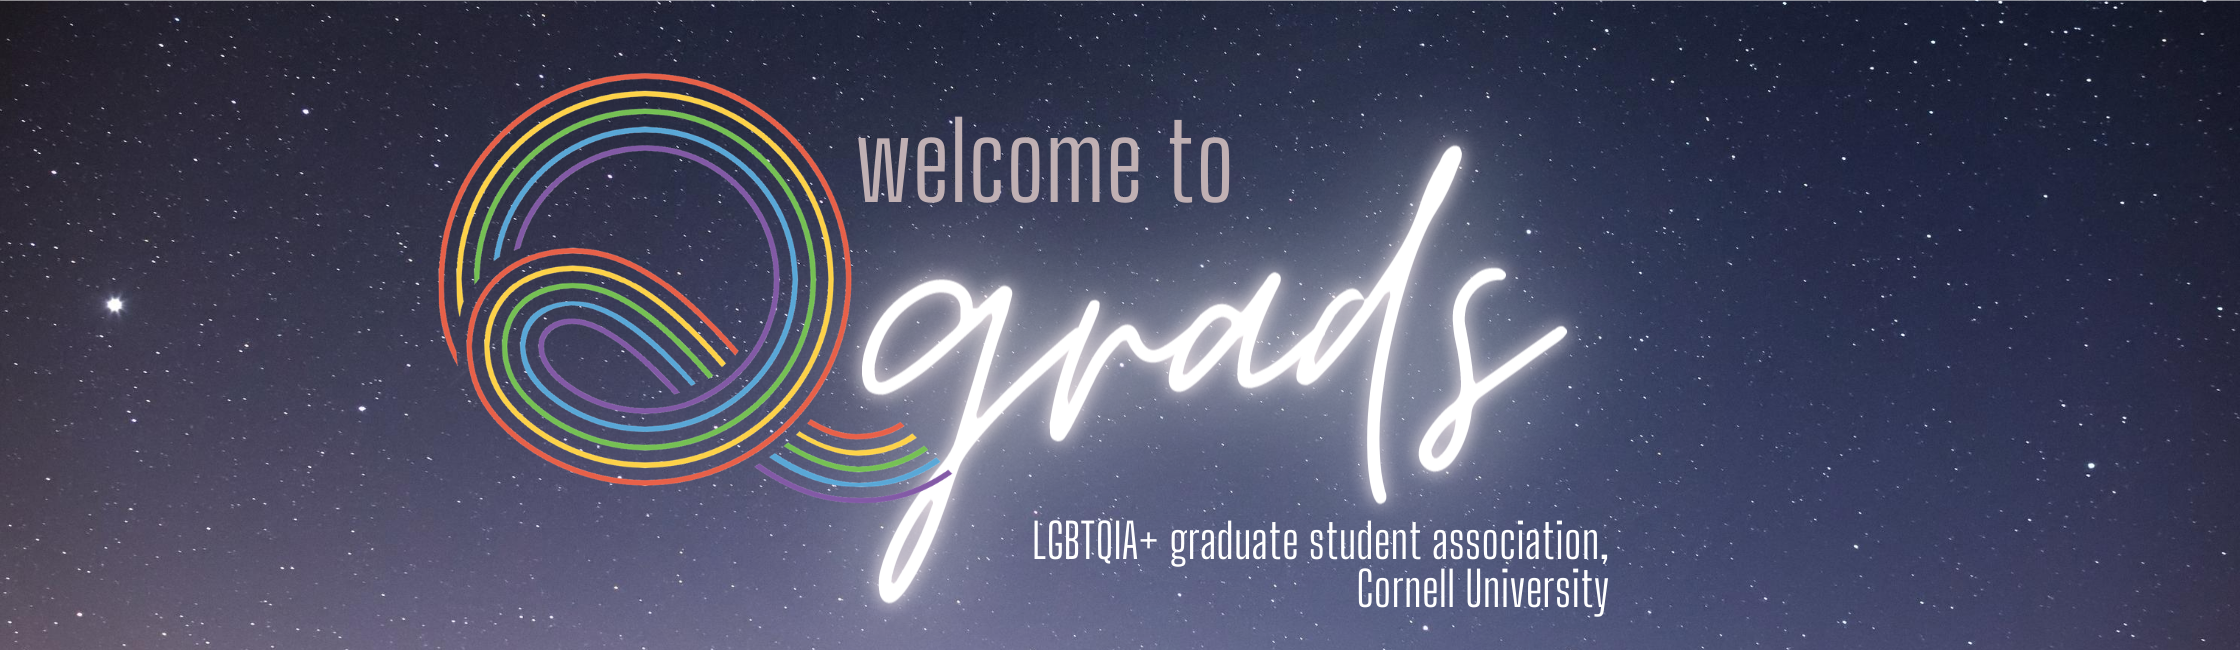 Welcome to Qgrads! The LGBTQIA+ graduate student association at Cornell University